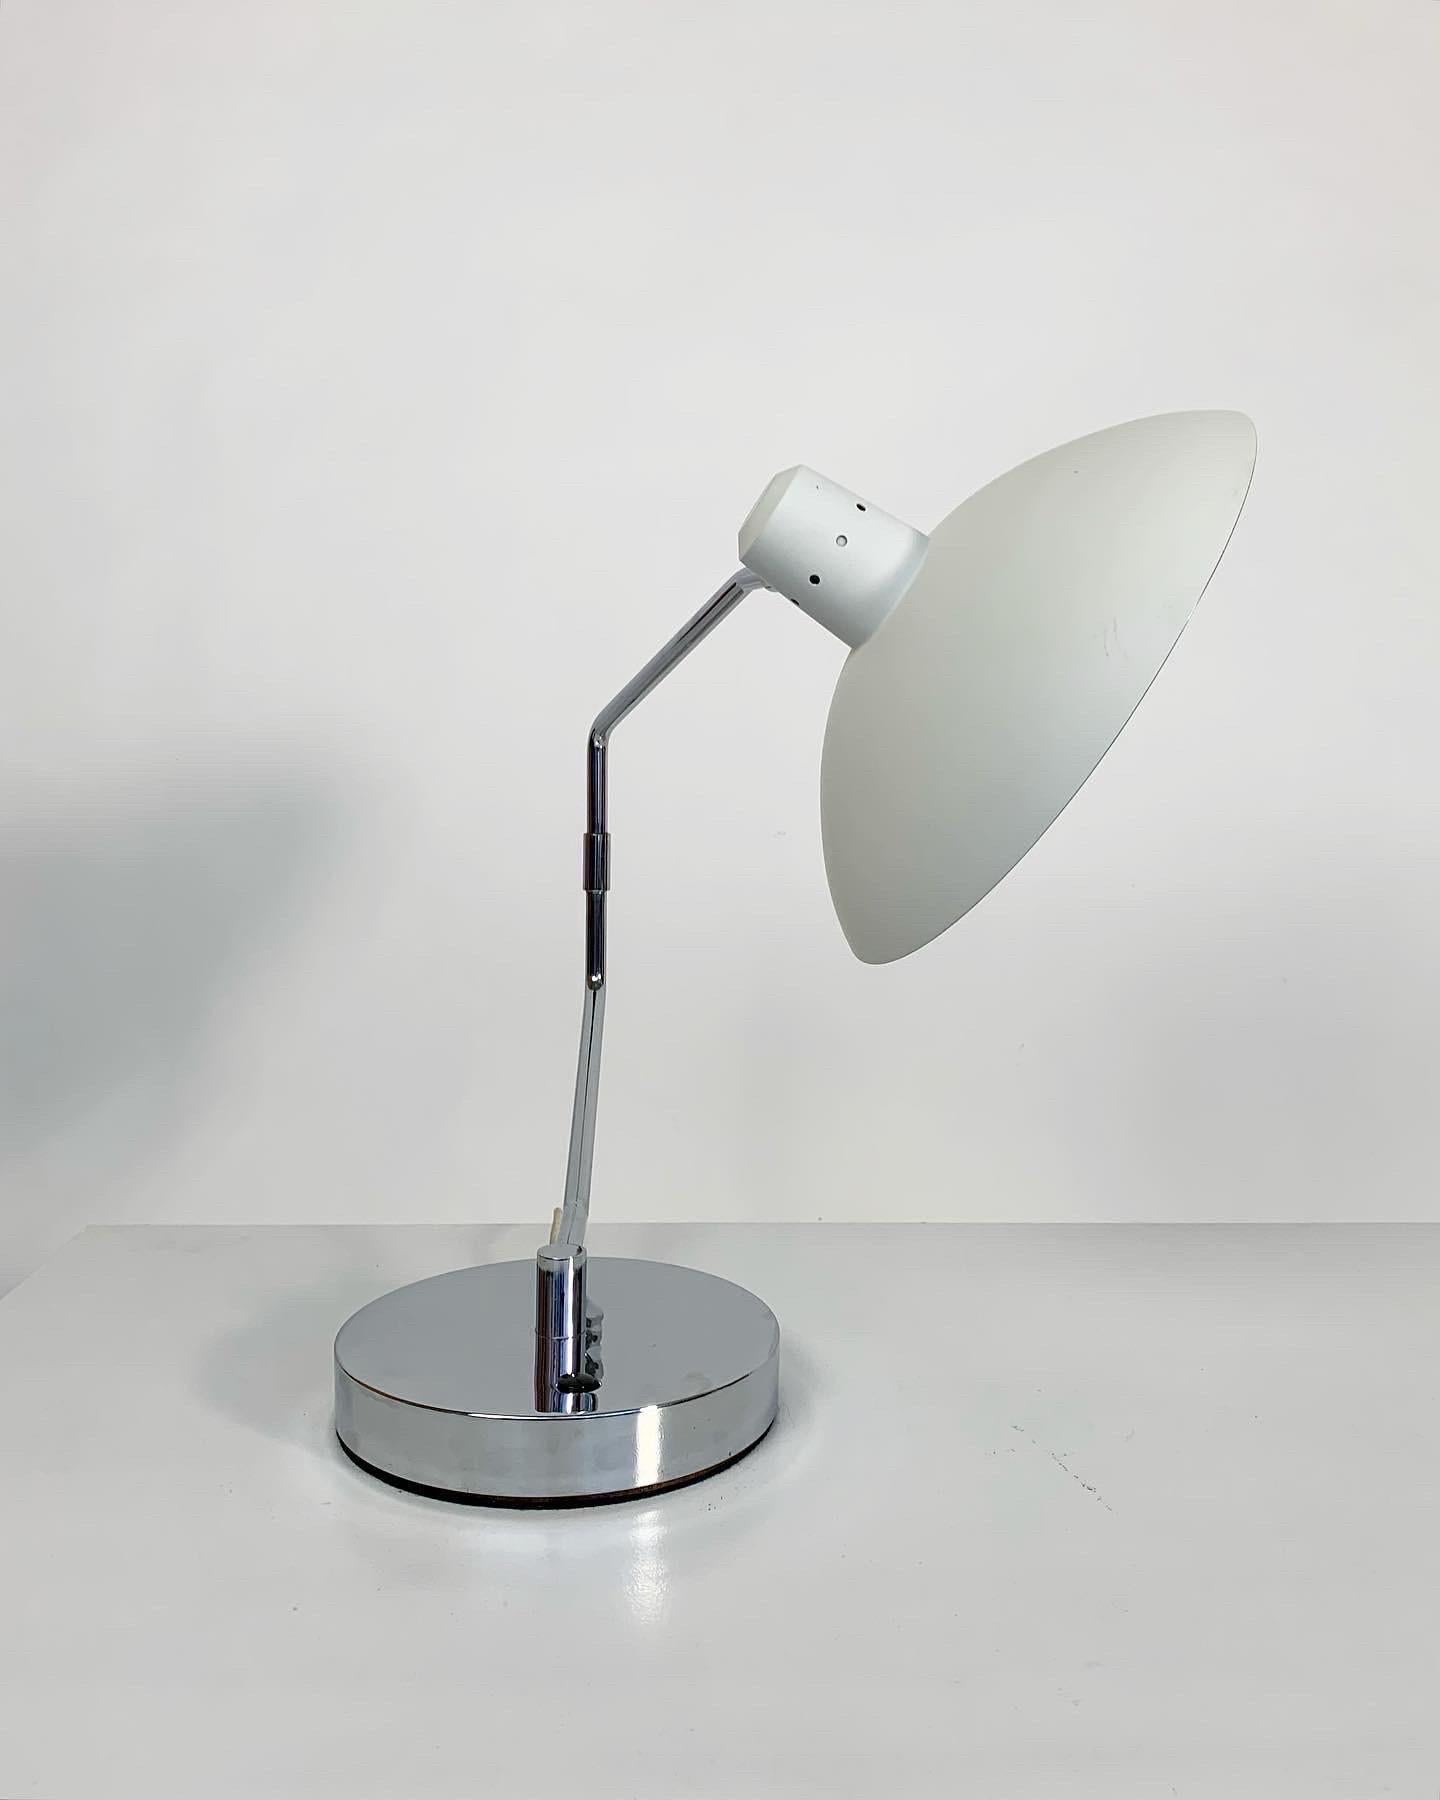 Hand-Crafted Clay Michie Desk Lamp Knoll International Chrome & White Lacquered Metal 1950s